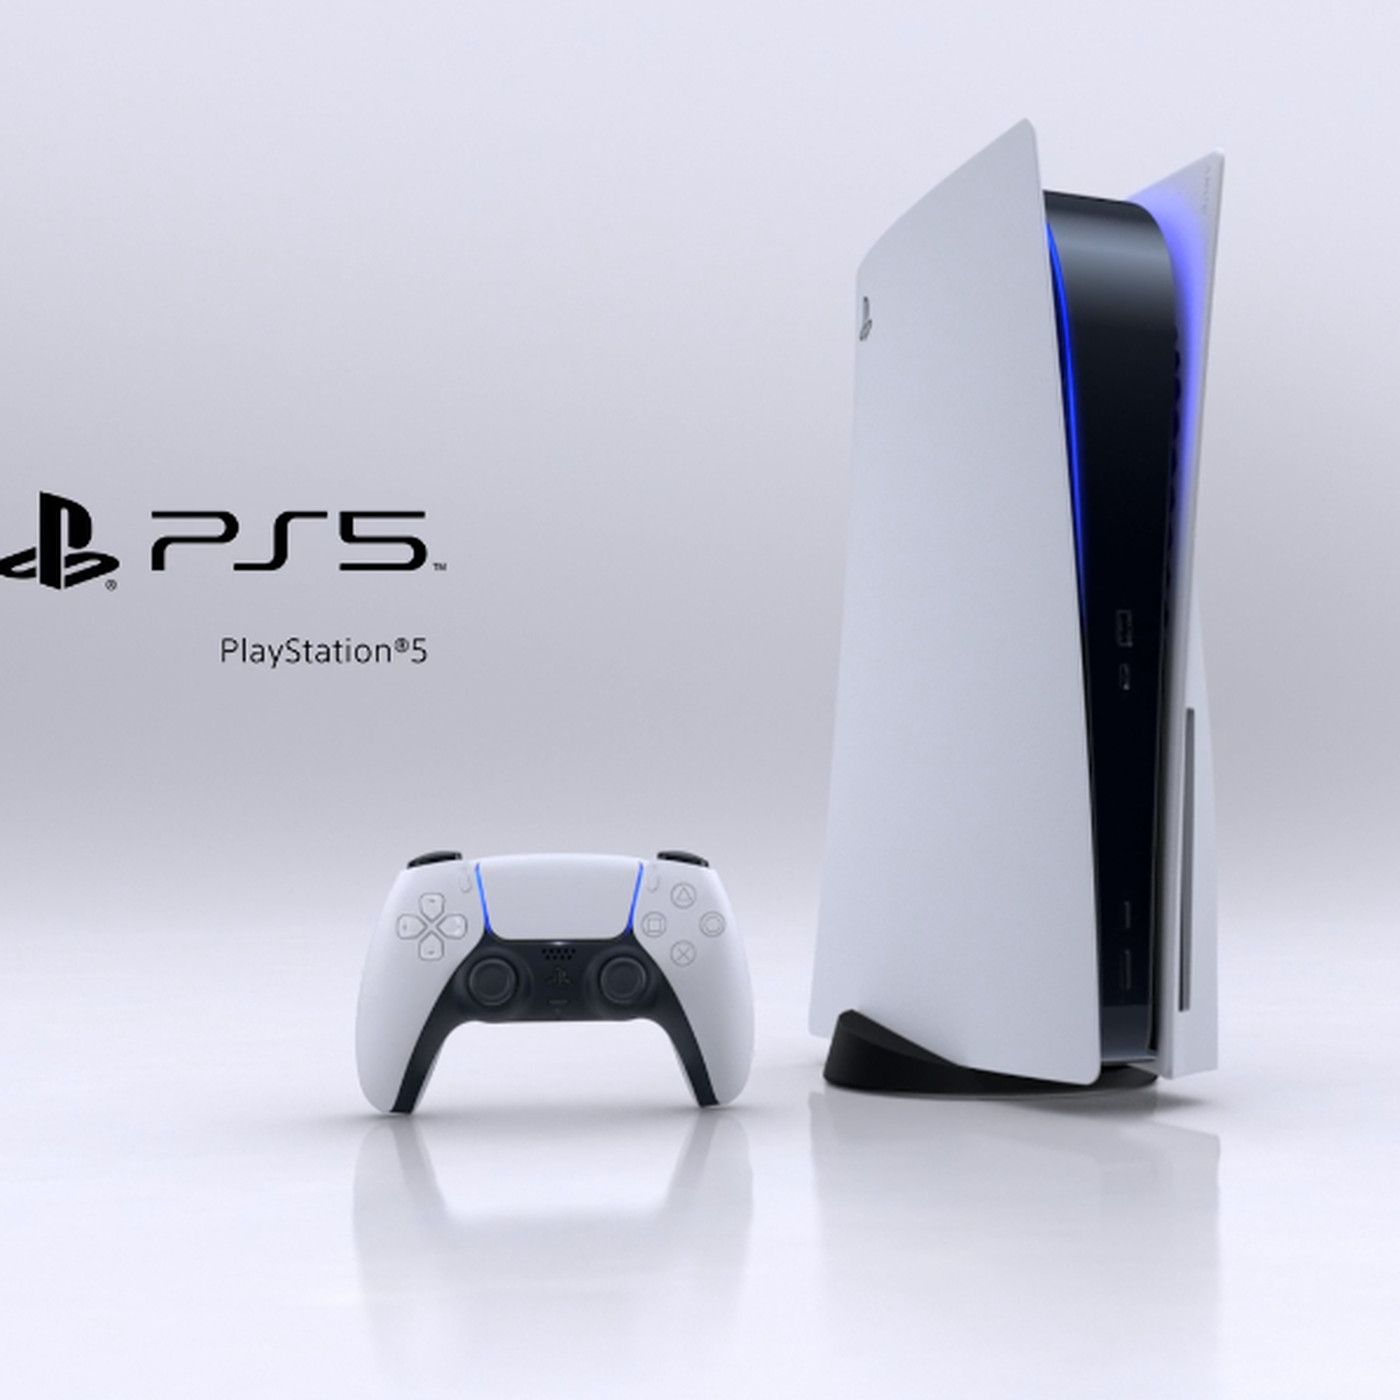 PlayStation 5 announcement: specs, hardware, and design